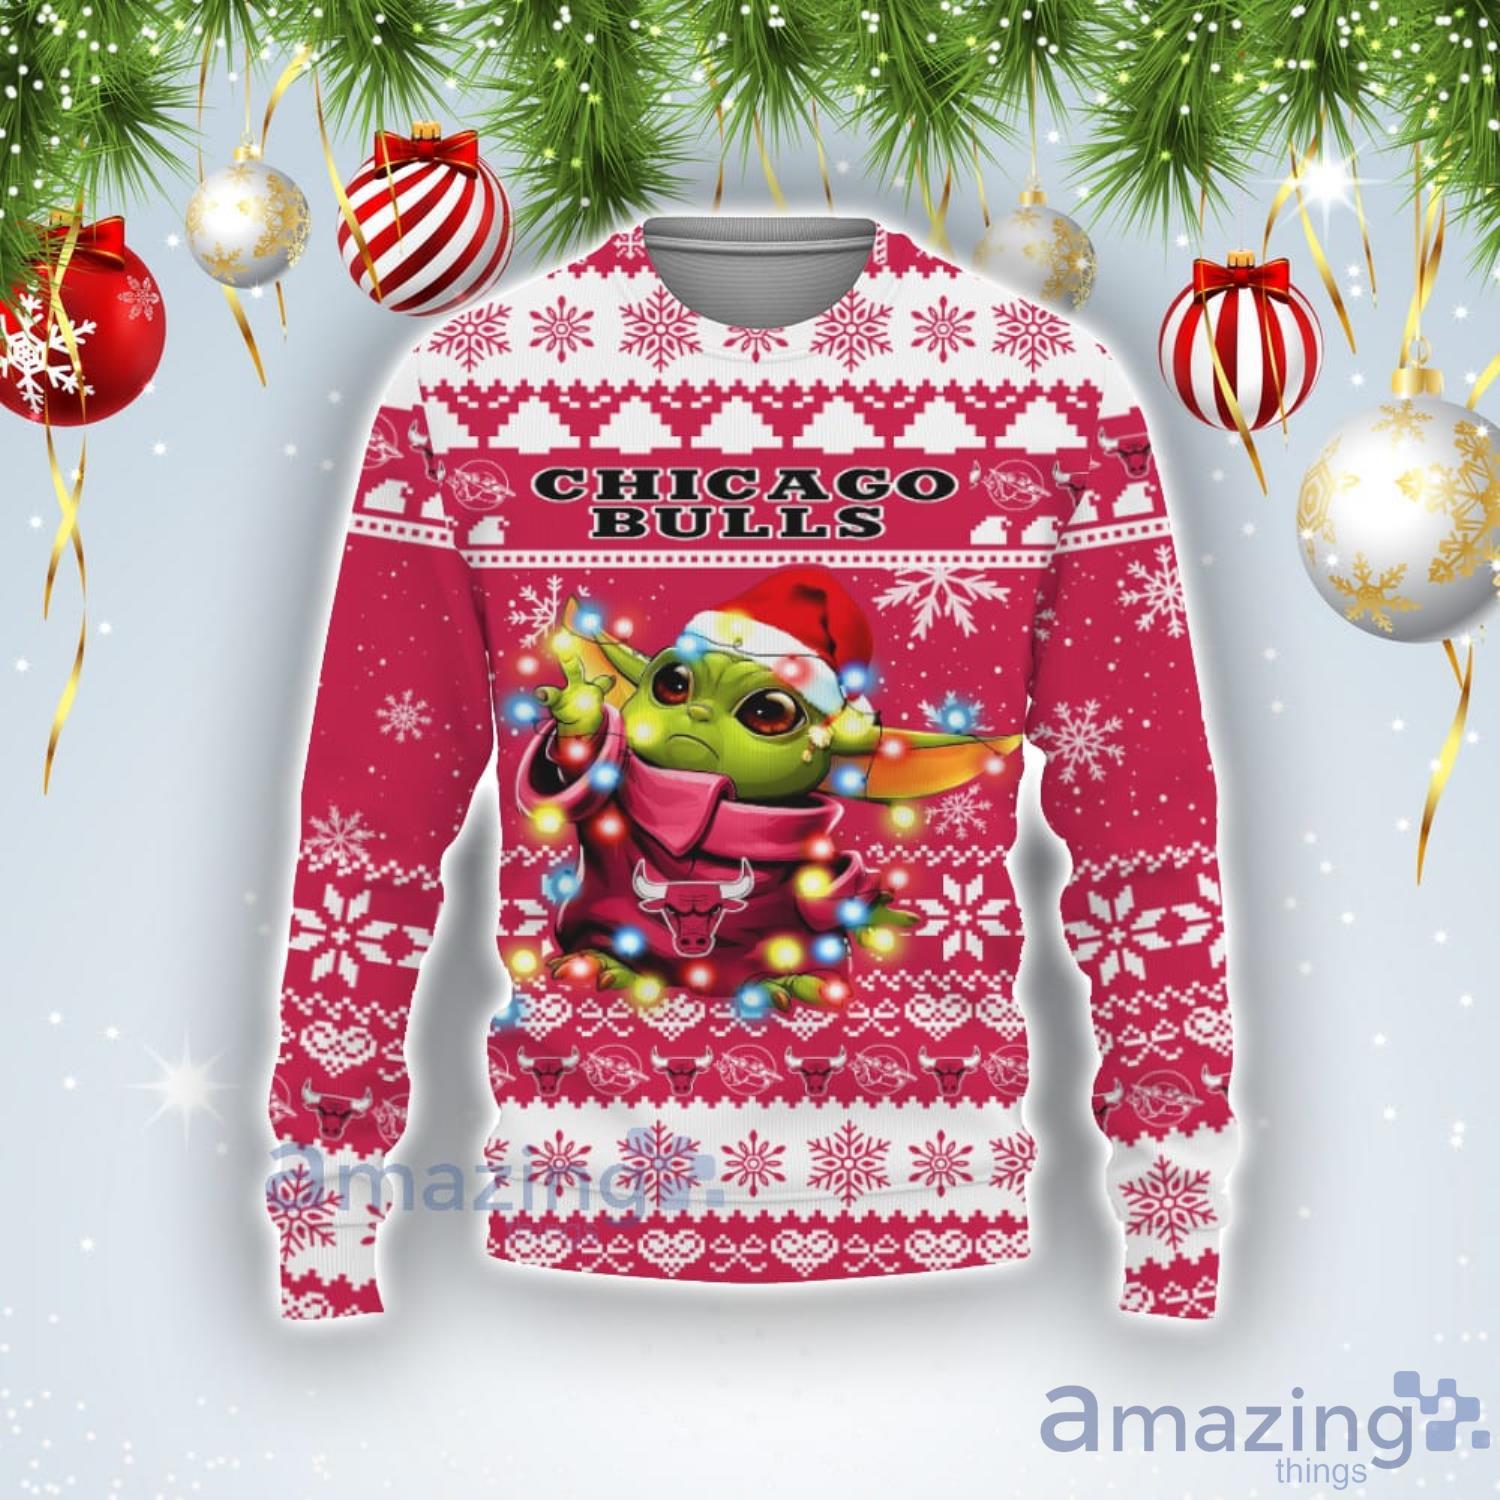 Chicago Bulls Baby Yoda Star Wars American Ugly Christmas Sweater Product Photo 1